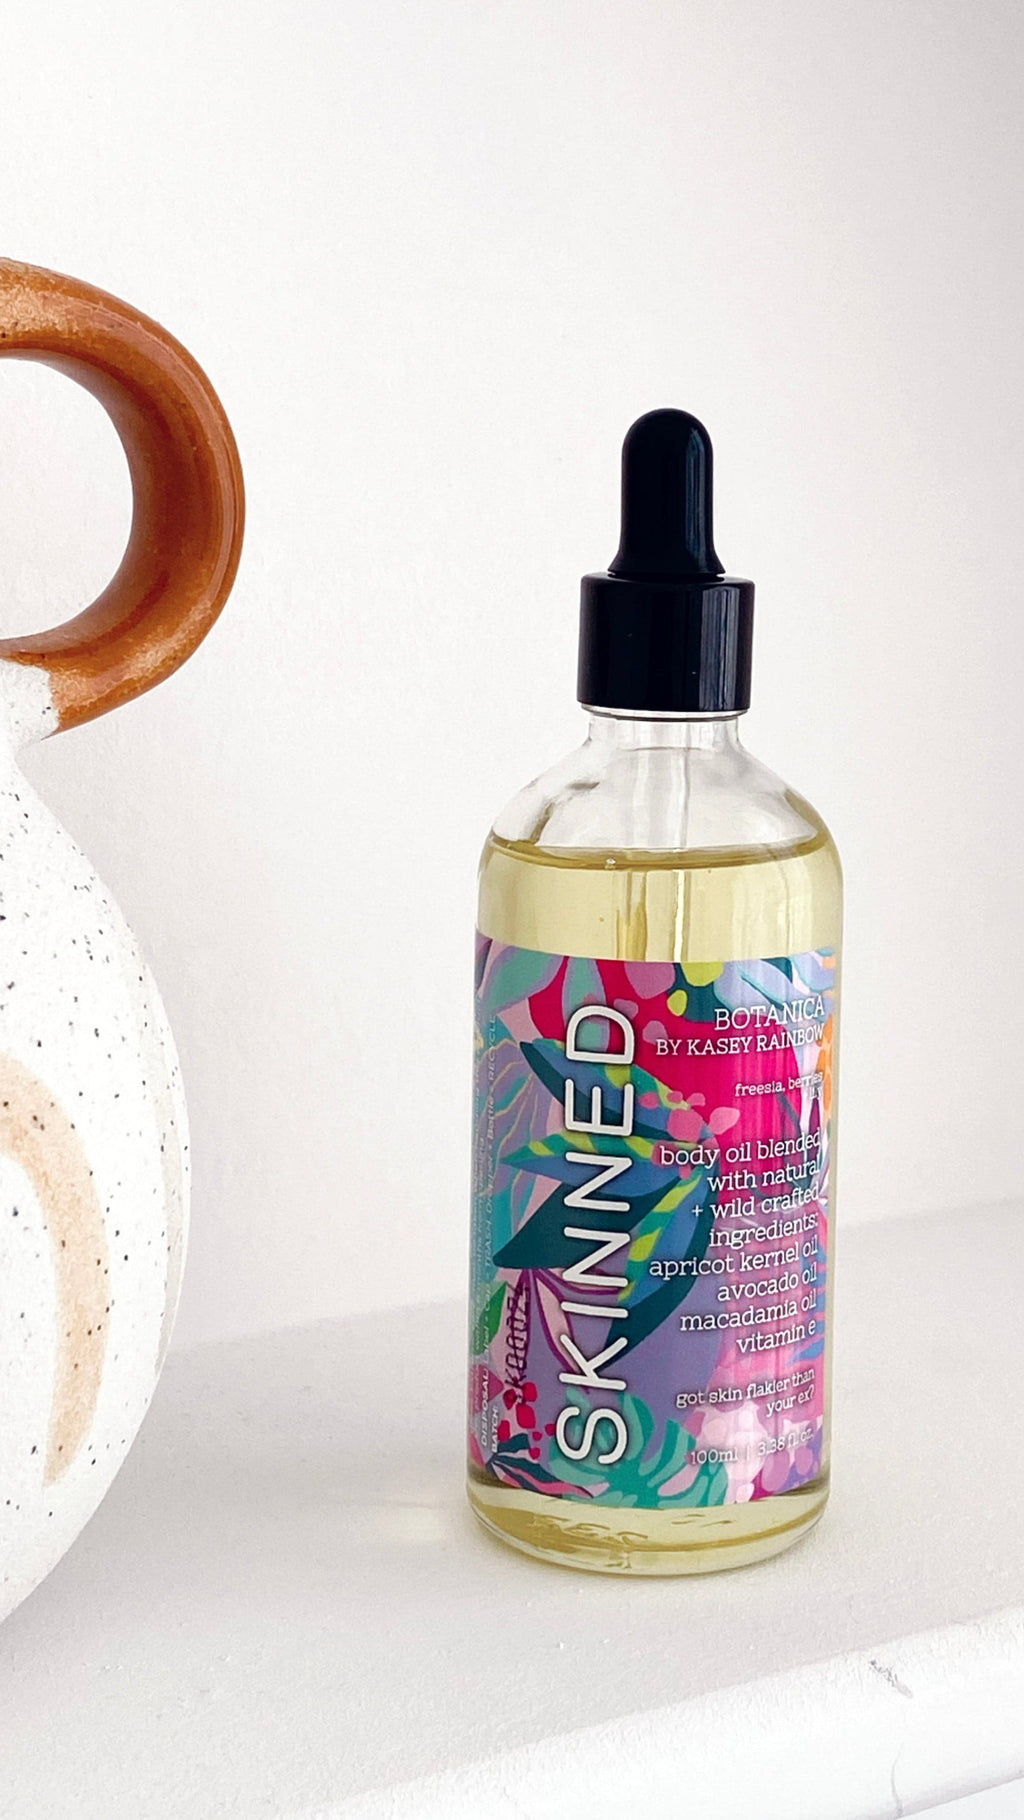 Botanica Body Oil by Kasey Rainbow - Limited Addition